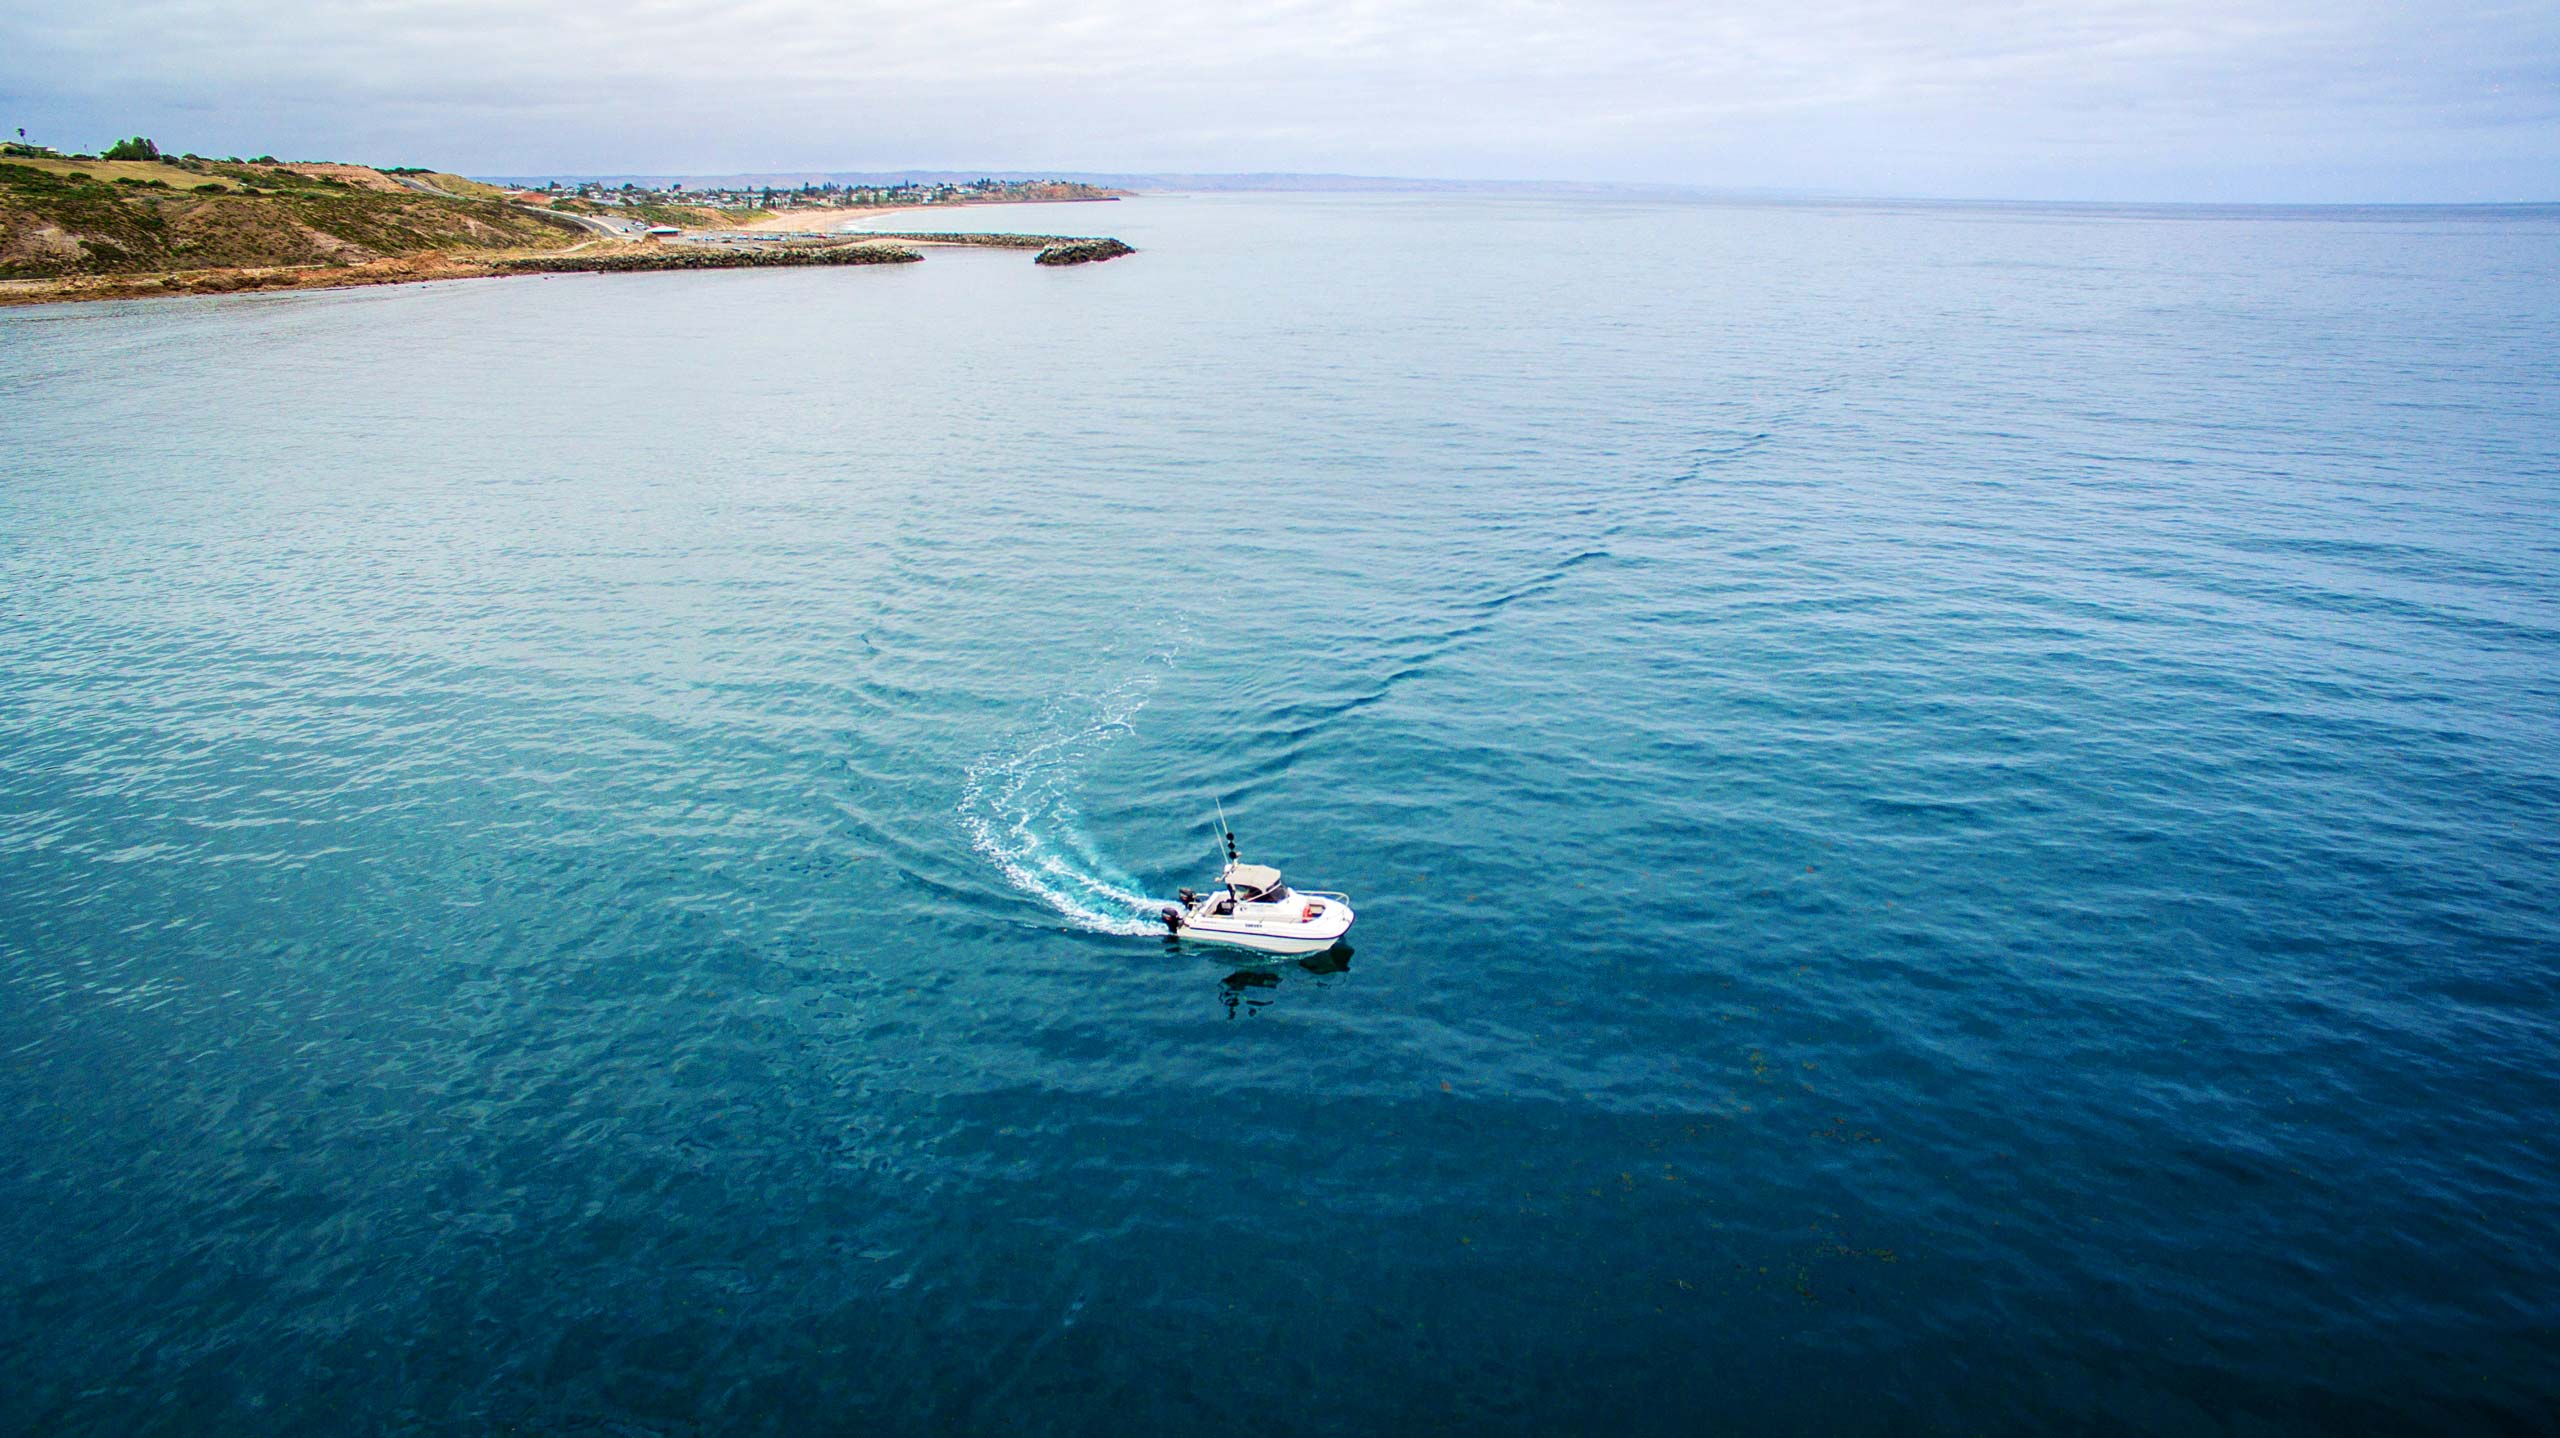 Boaties urged to keep clear of danger this summer